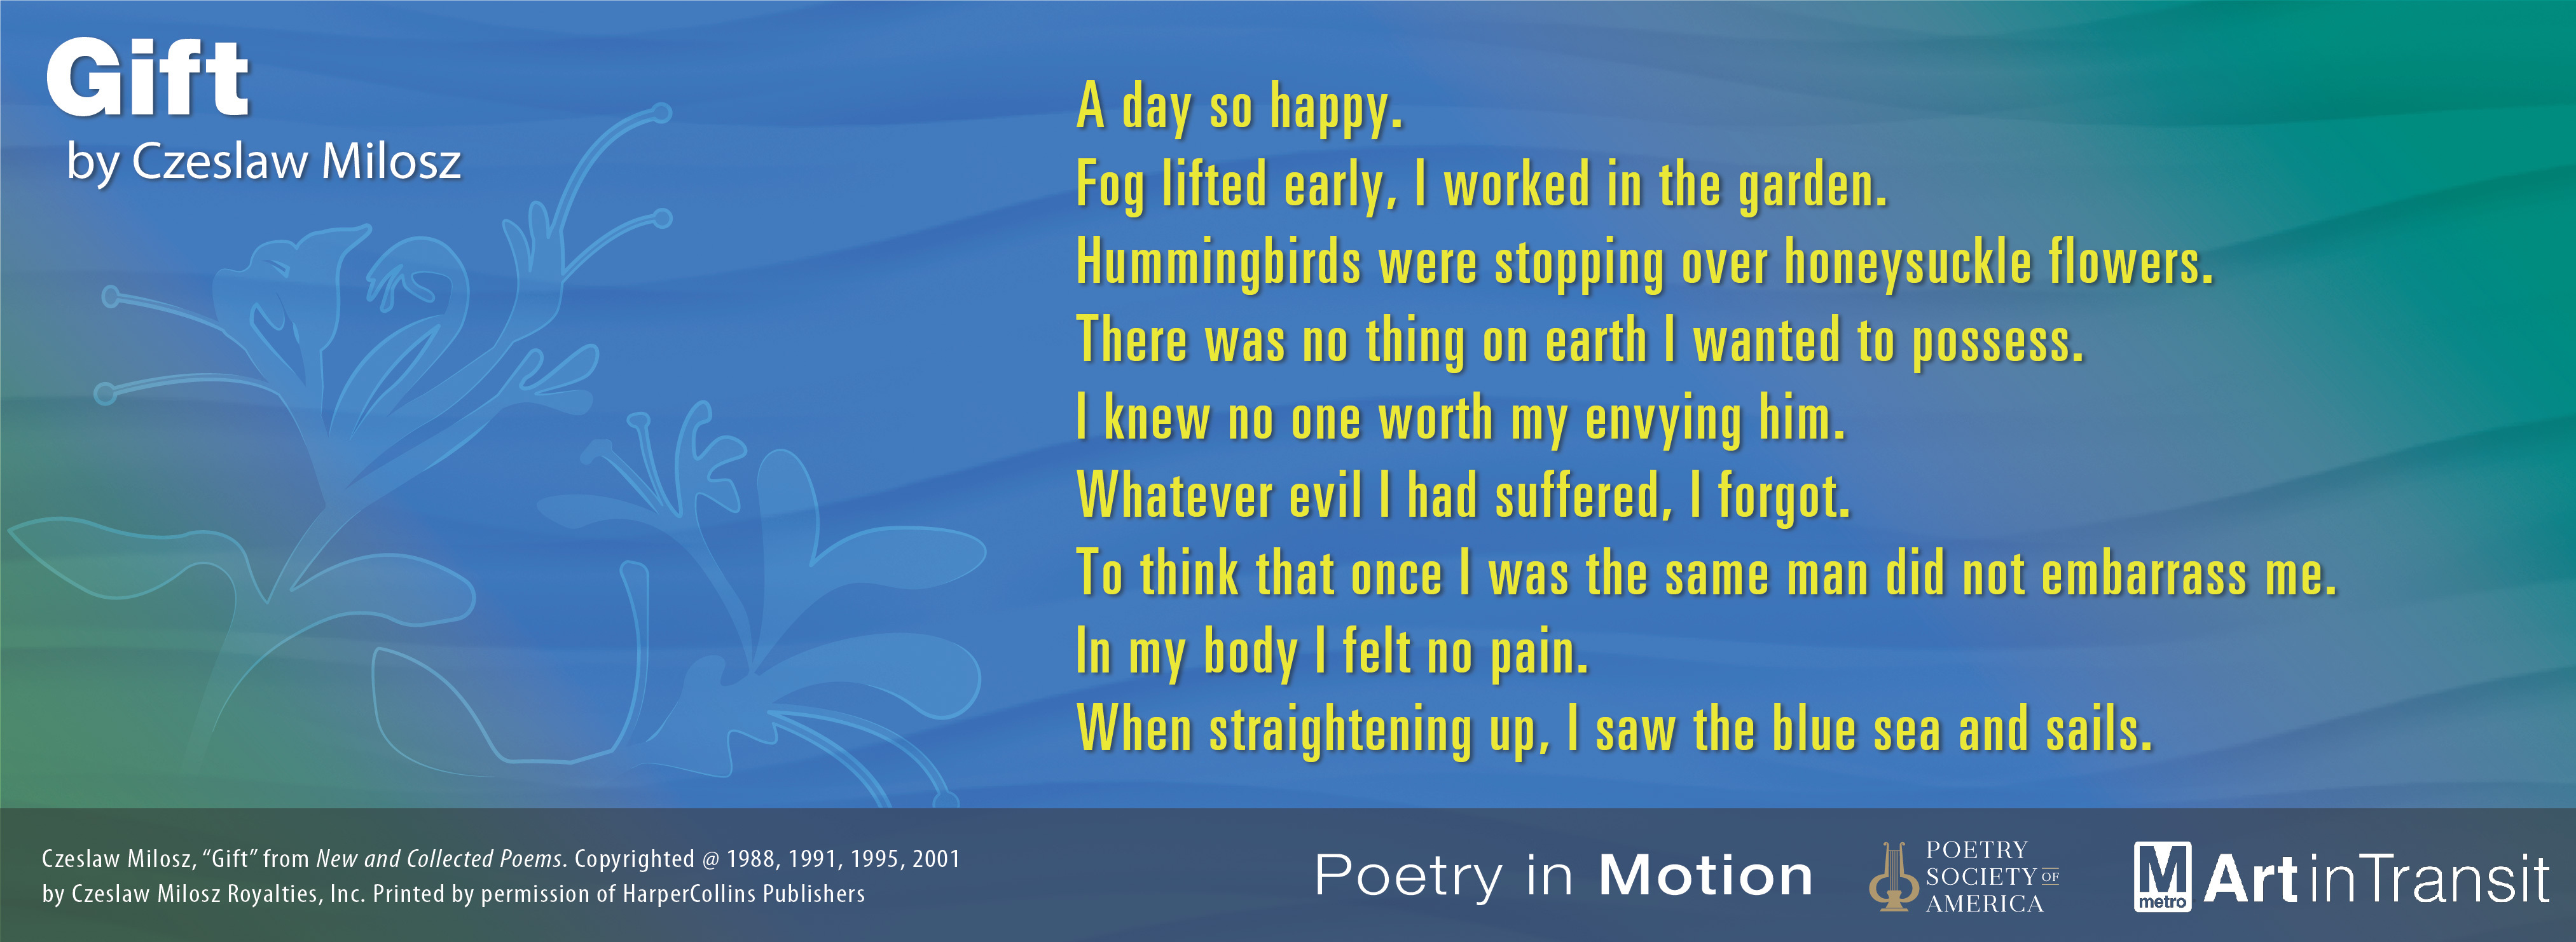 A vertical blue and green poster features the poem Gift, by Czeslaw Milosz in yellow text. Two flowers rise from the bottom left corner.